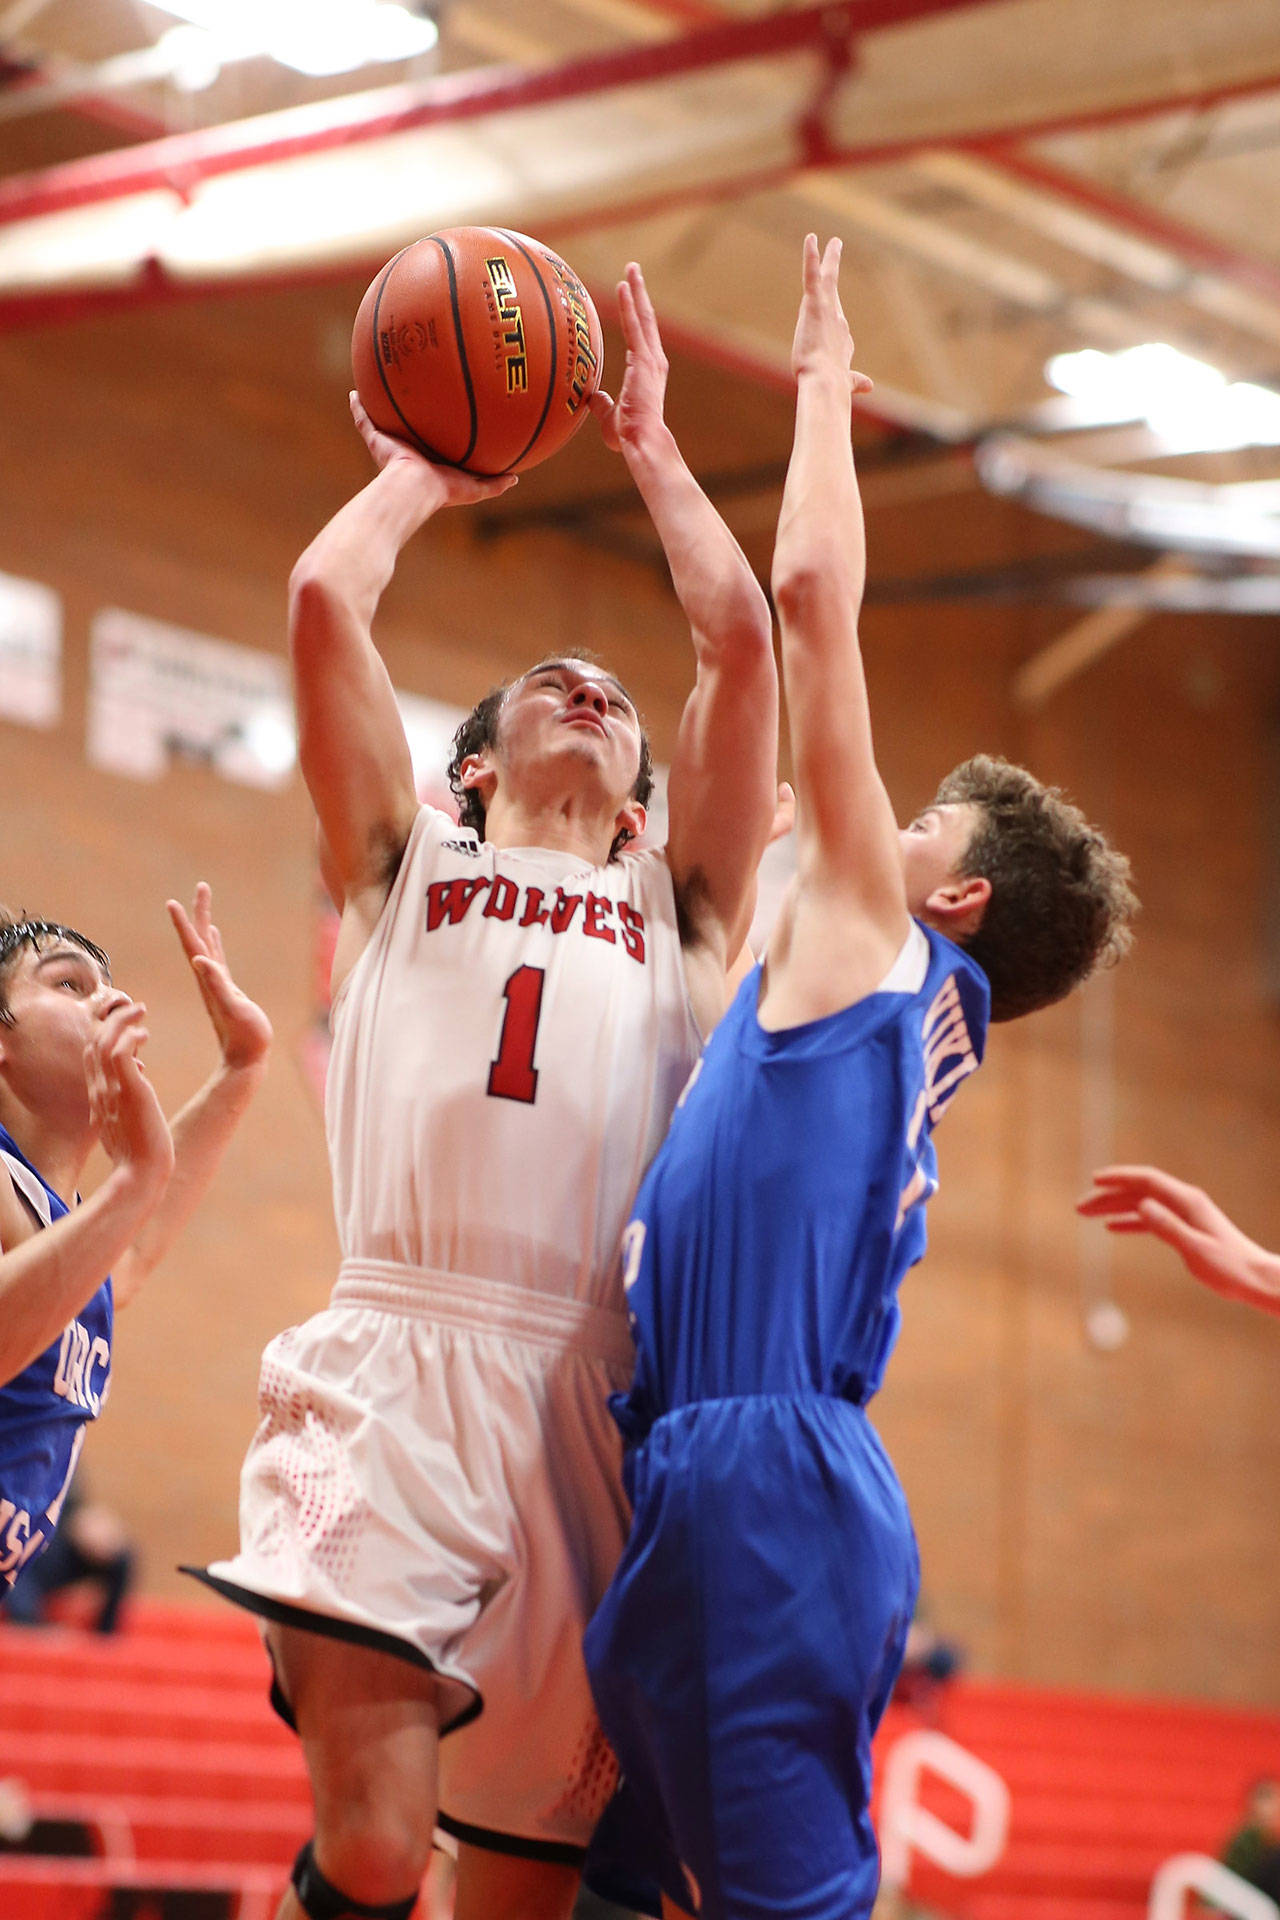 Coupeville’s Jered Brown powers to the hoop to help the Wolves defeat Orcas Island Saturday. (Photo by John Fisken)